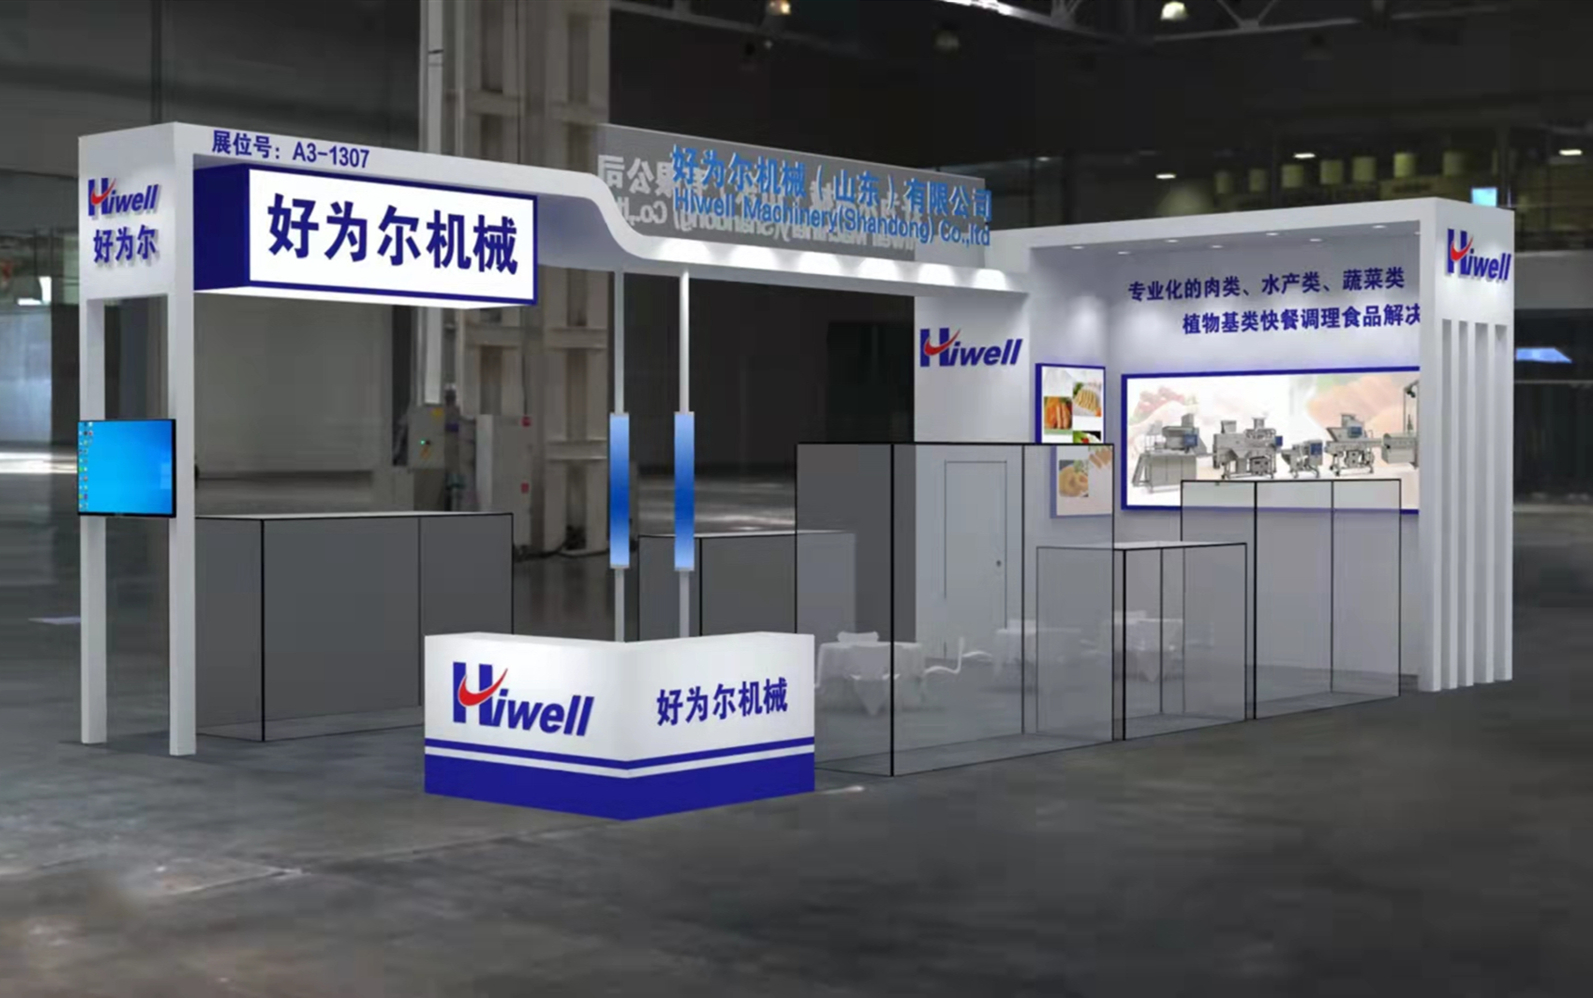 Hiwell was 2021 van de China Fisheries & Seafood Expo.